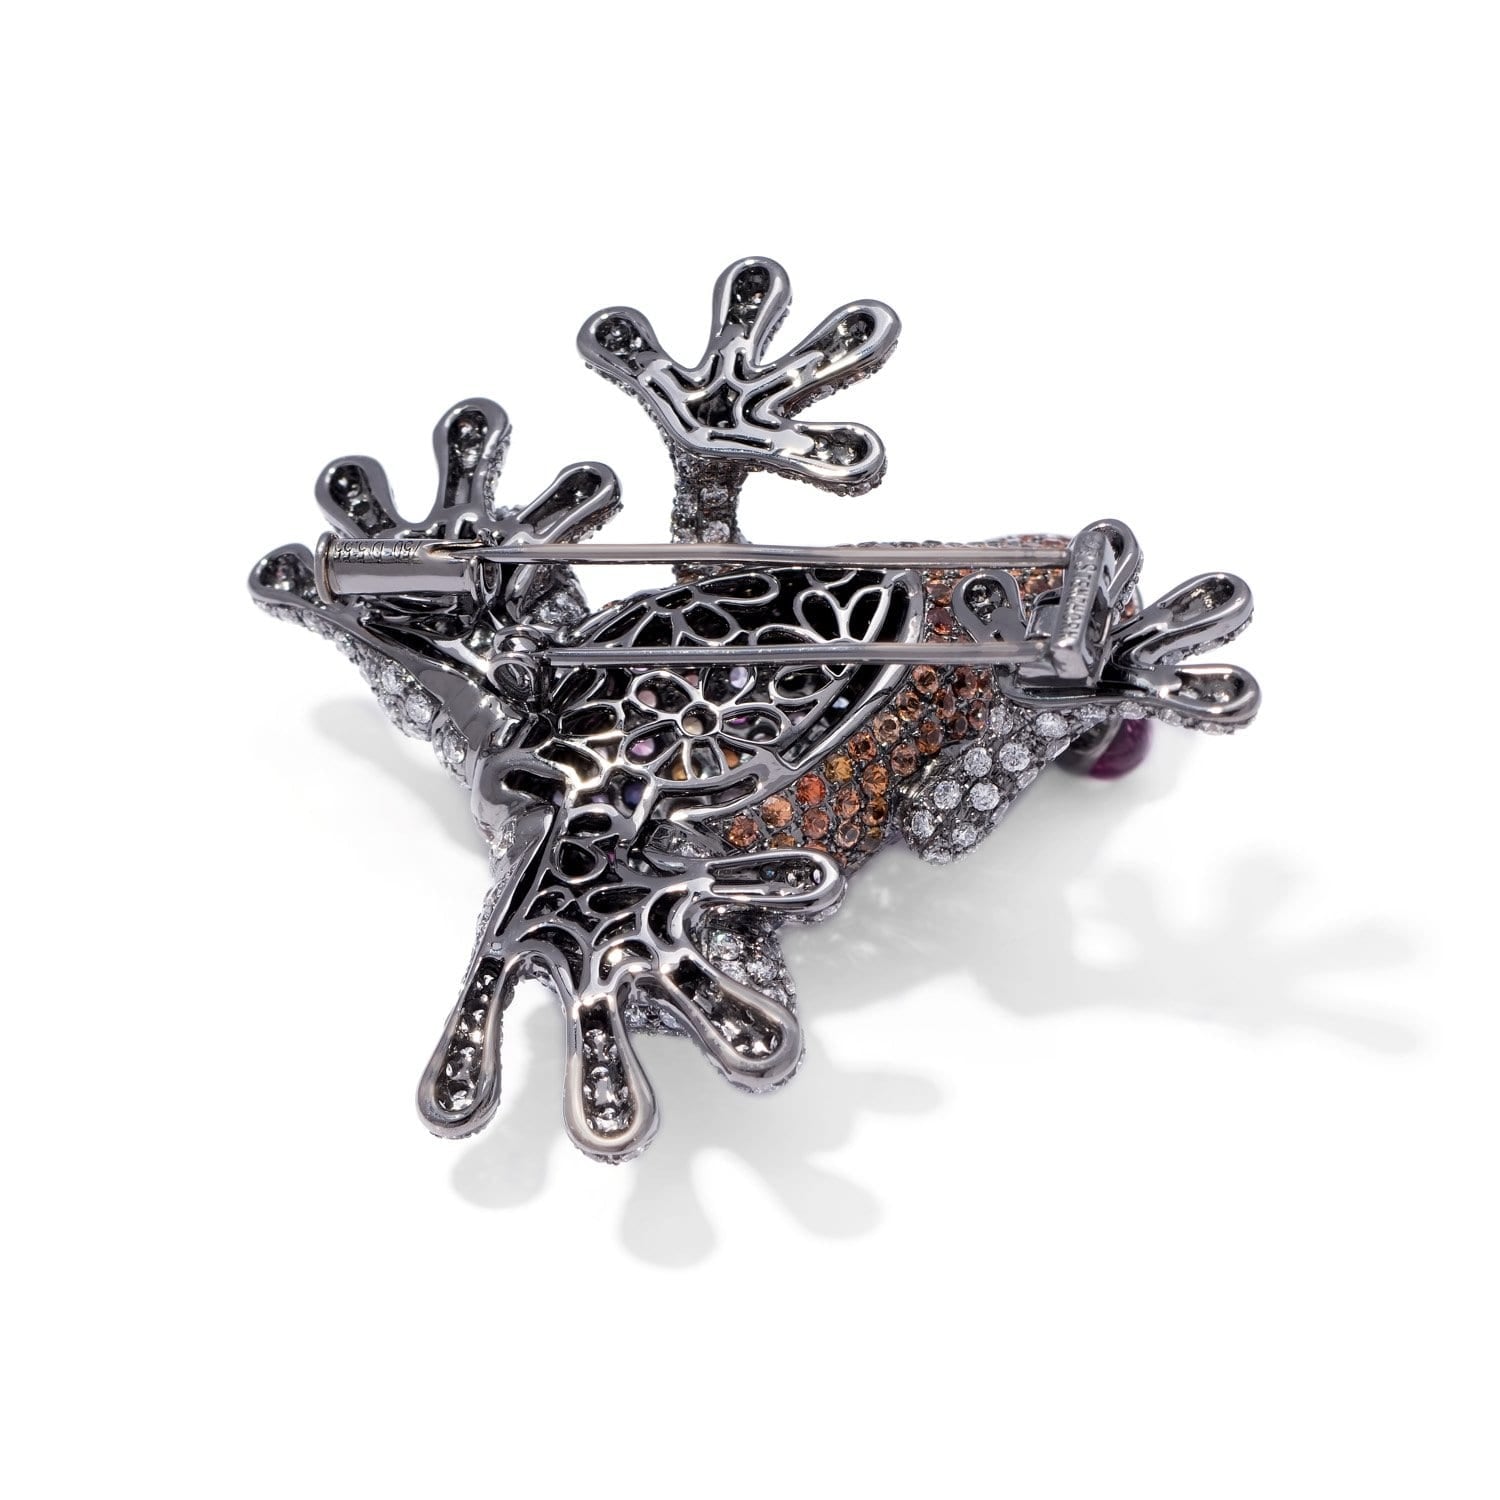 VINTAGE: Wild Life Frog, Mixed Sapphire Brooch